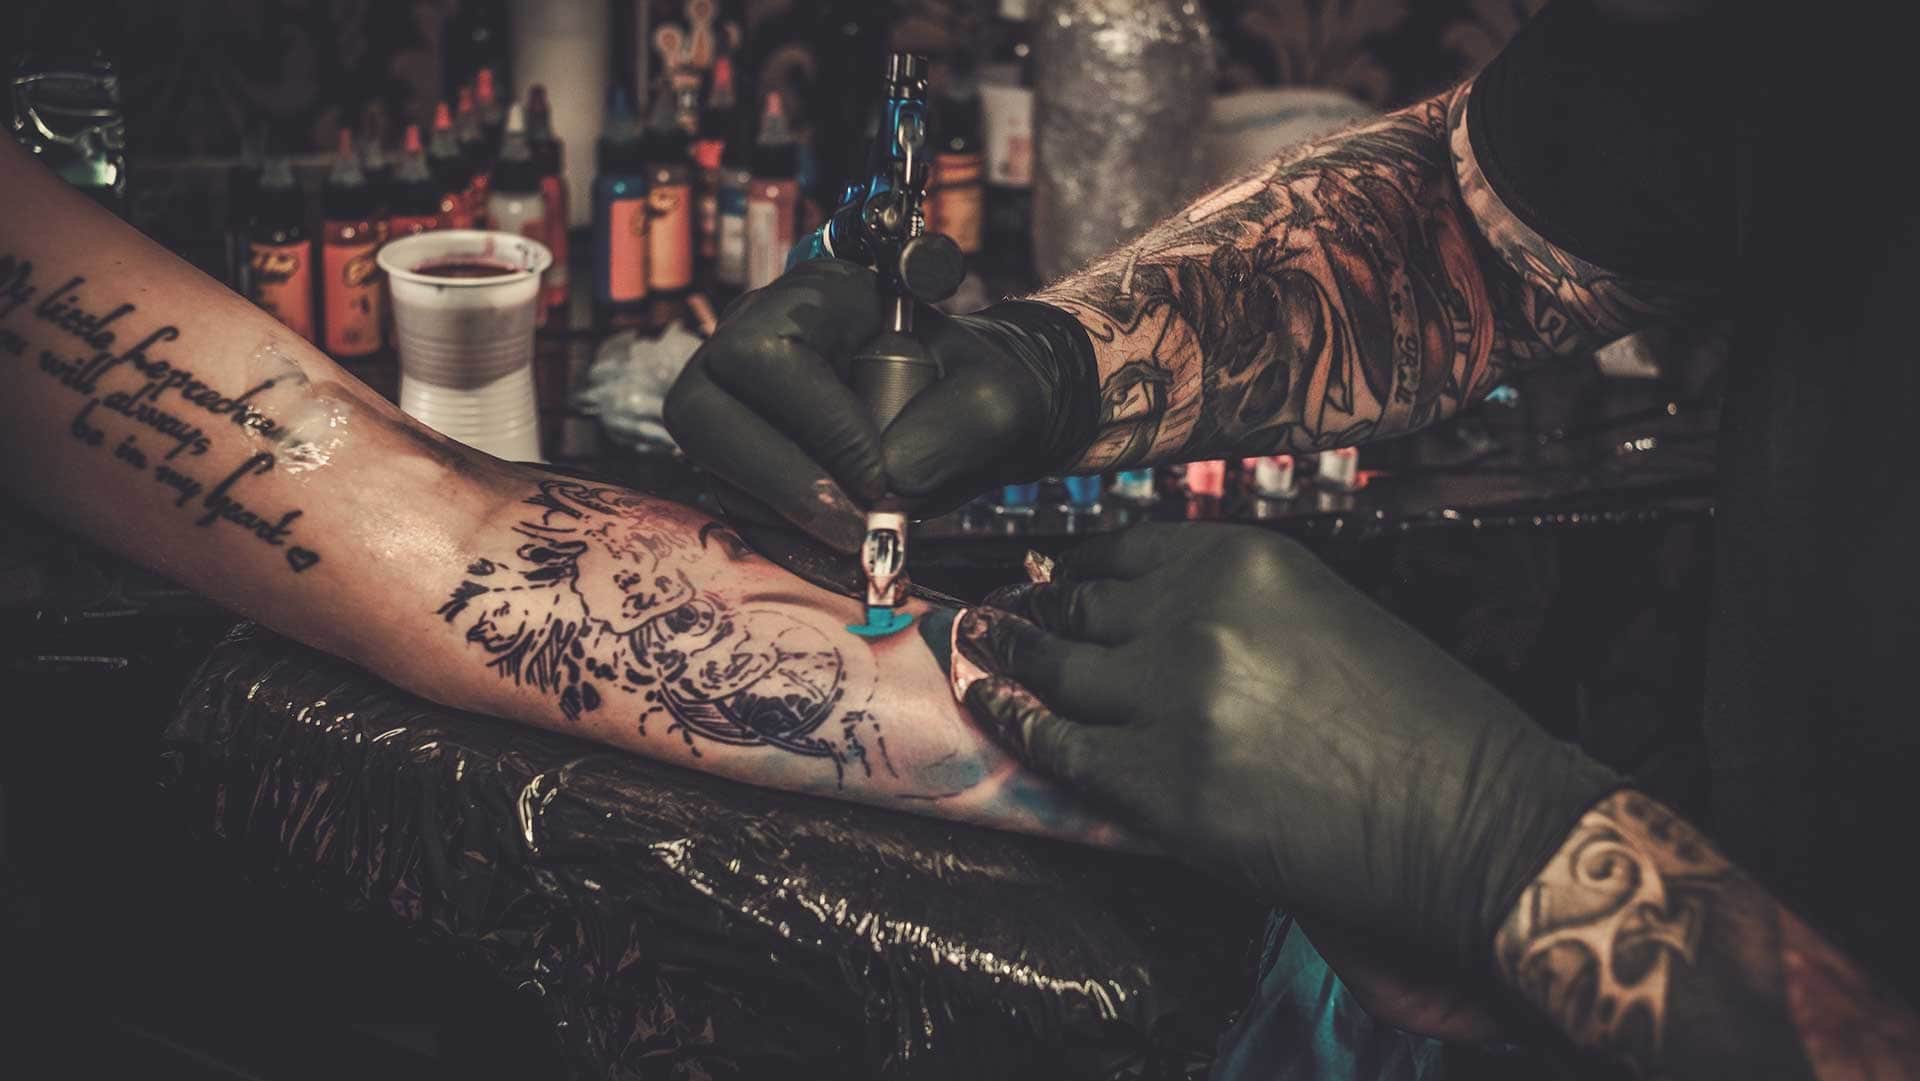 Top 32 Tattoo Shops In Spokane WA That Are in a Class of Their Own